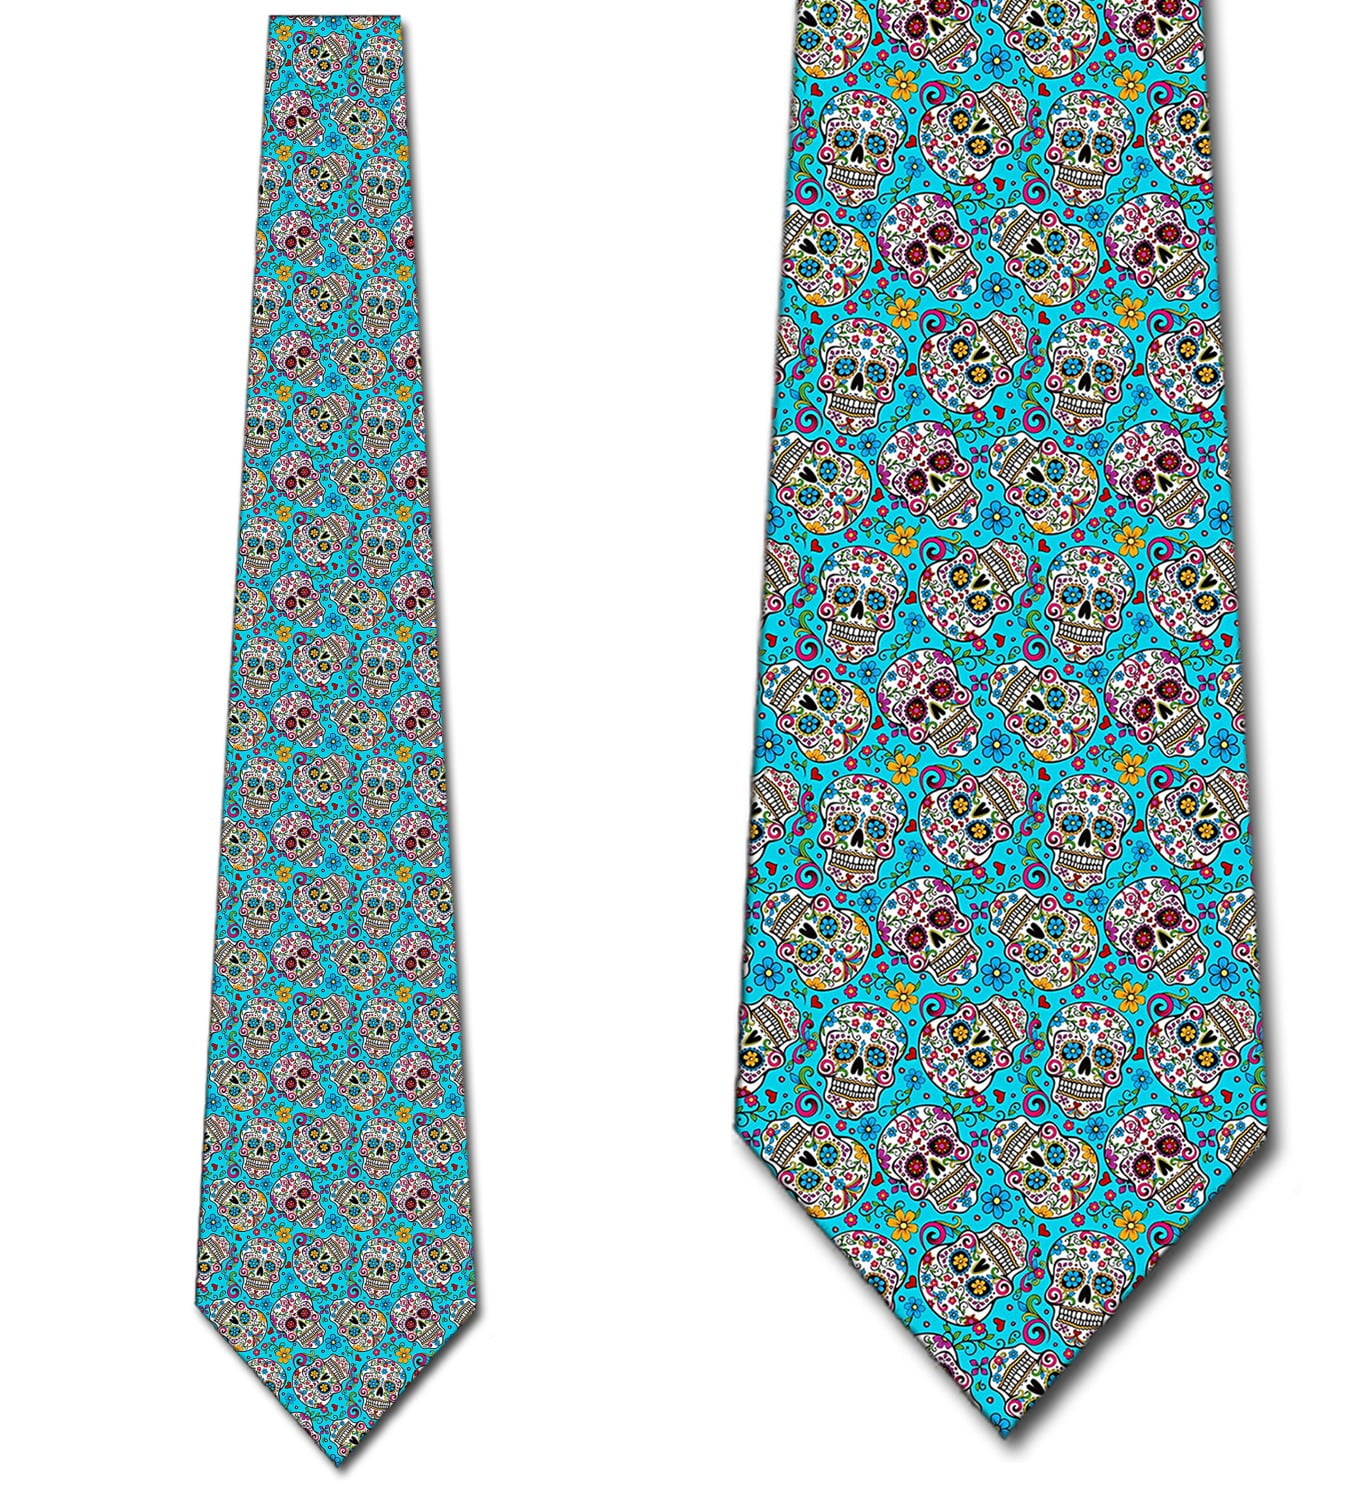 Autumn Leaves Tie Mens Fall Neckties by Three Rooker